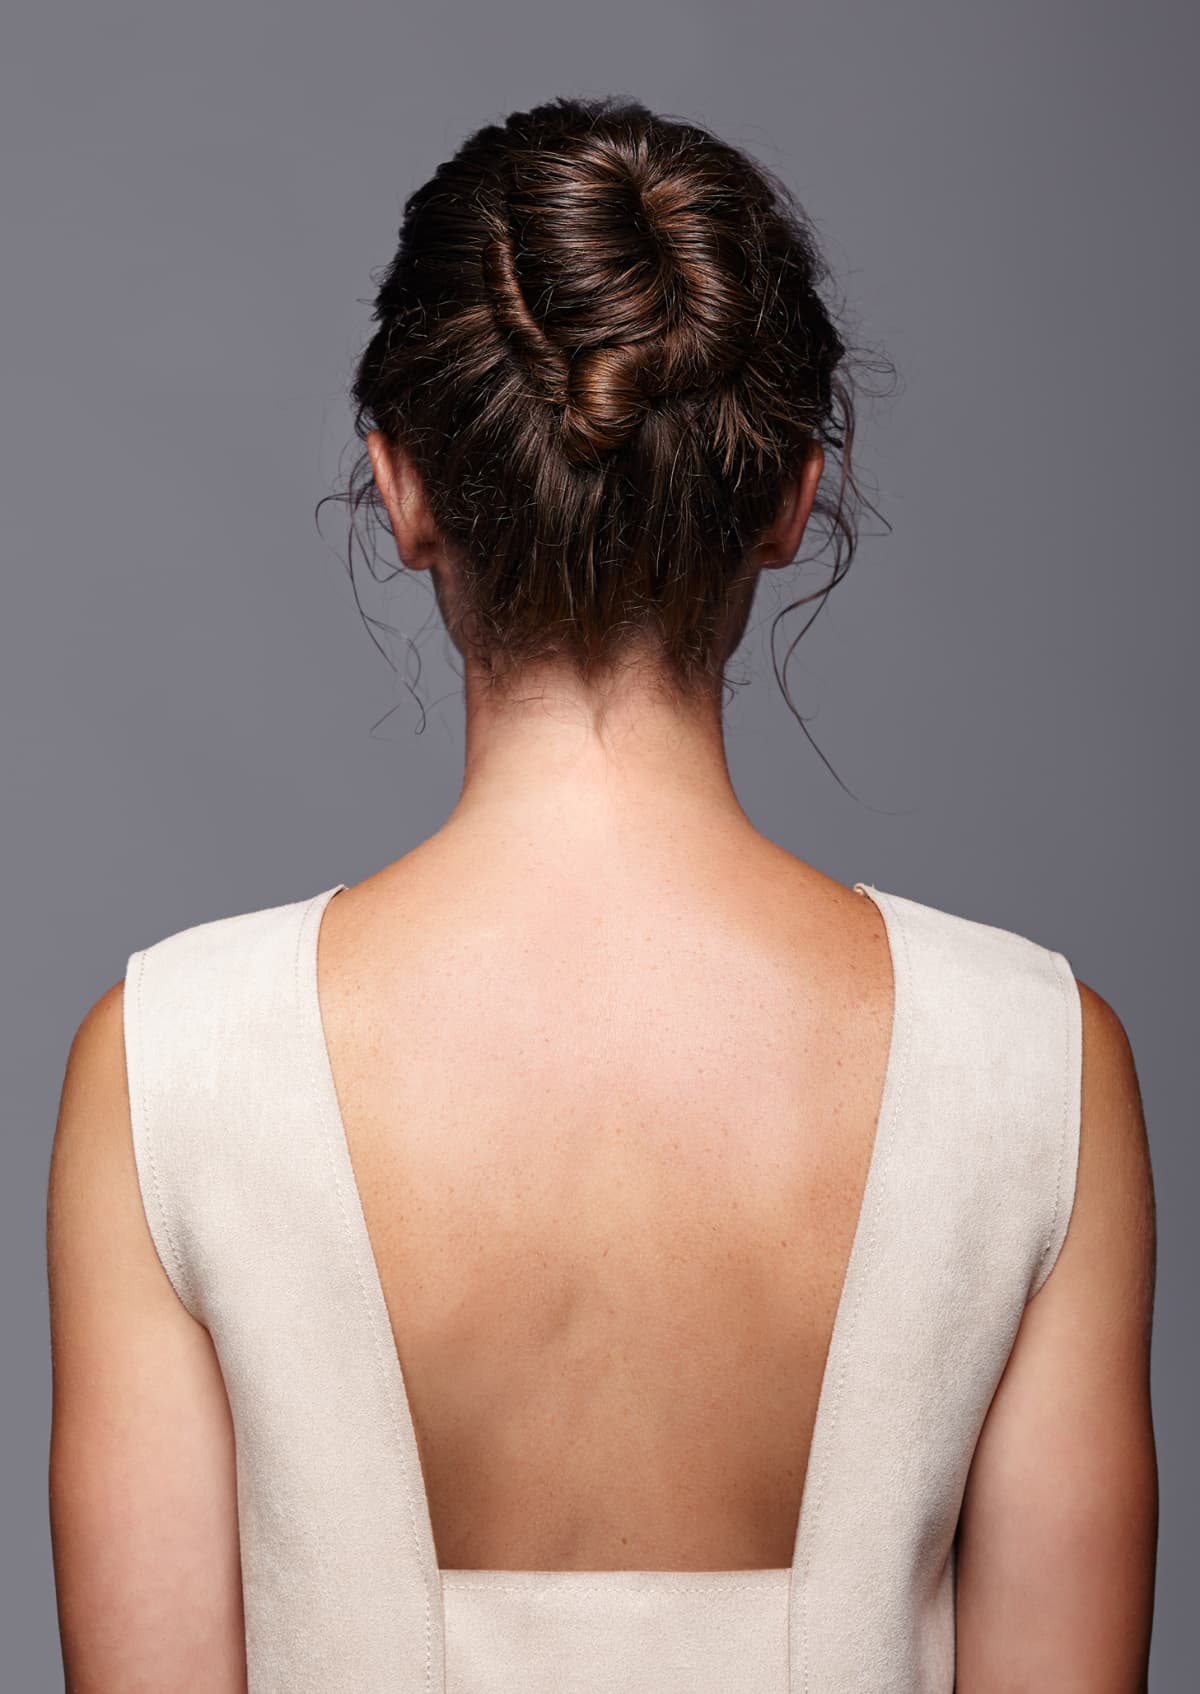 Picture of a woman from behind, her hair is in an updo and she has a blunging dress on revealing the nape of her neck